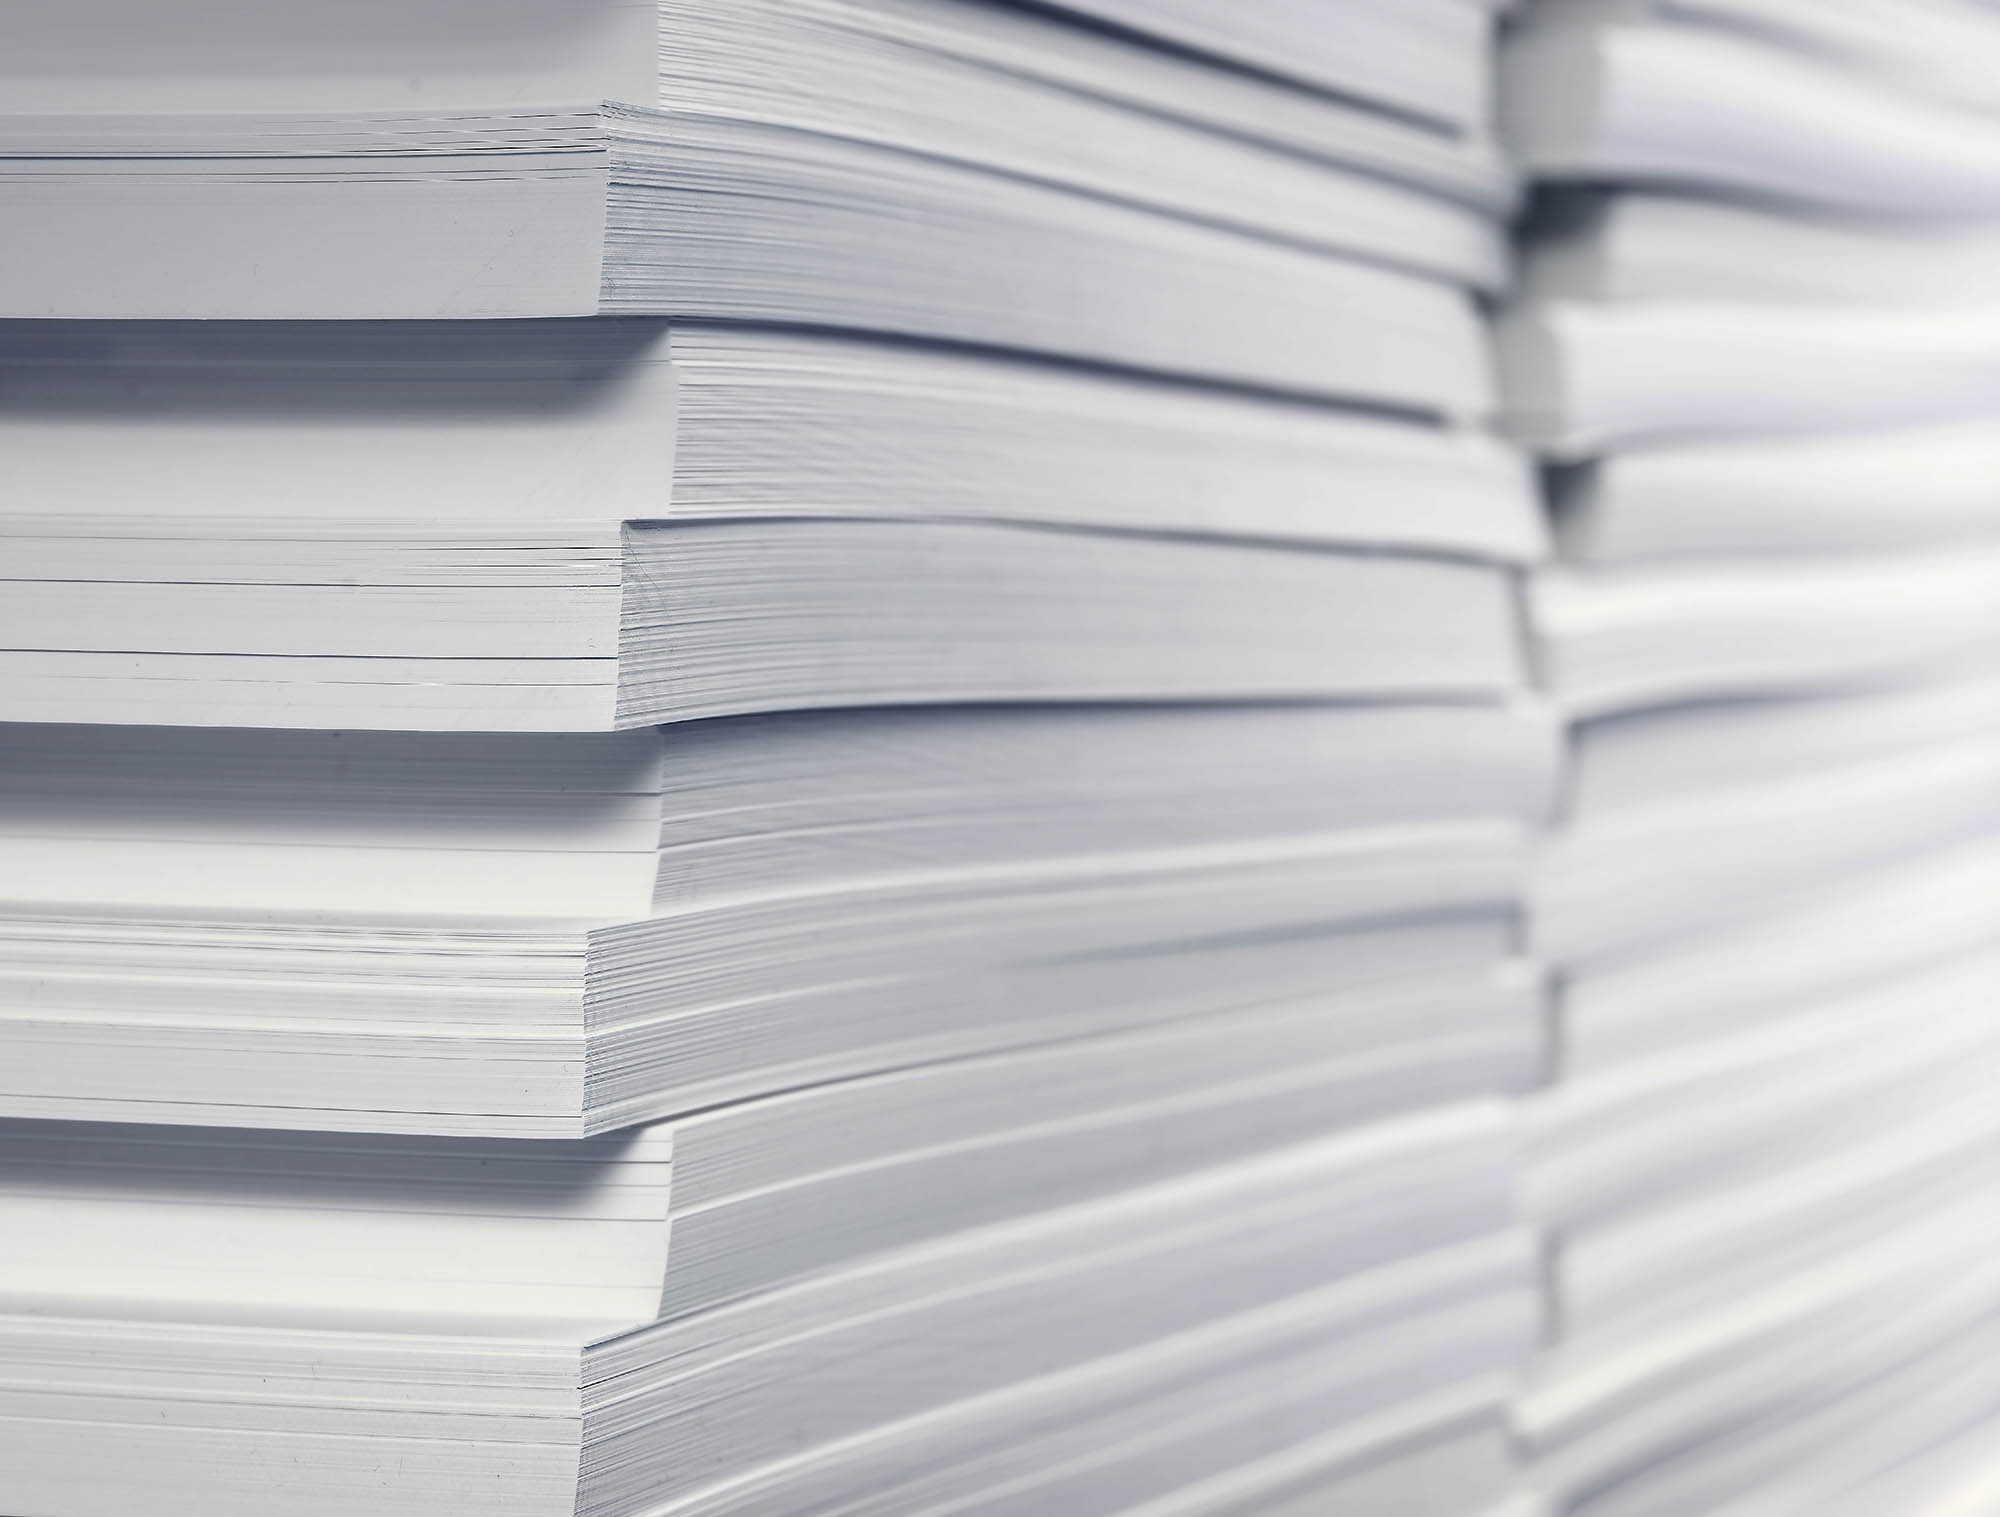 close -up of stack with white printing and writing papers